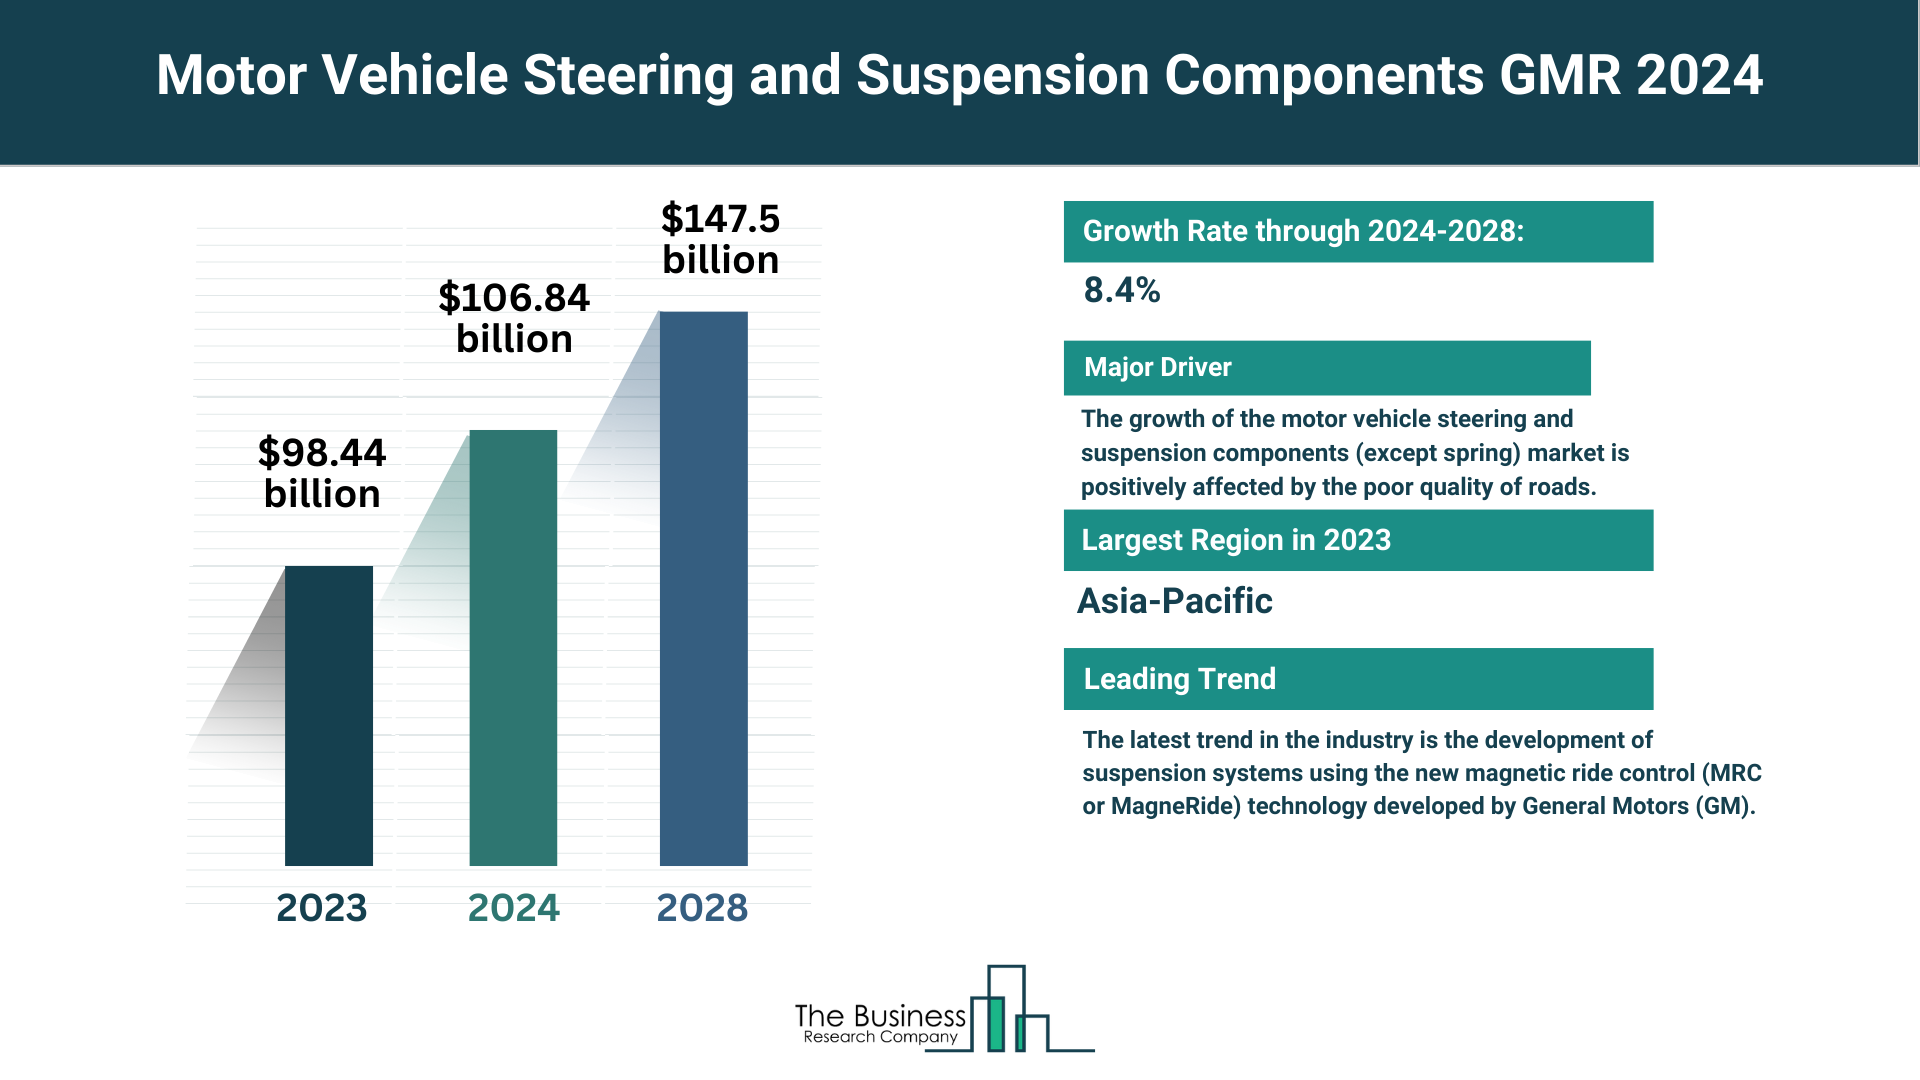 How Will Motor Vehicle Steering and Suspension Components (except Spring) Market Grow Through 2024-2033?